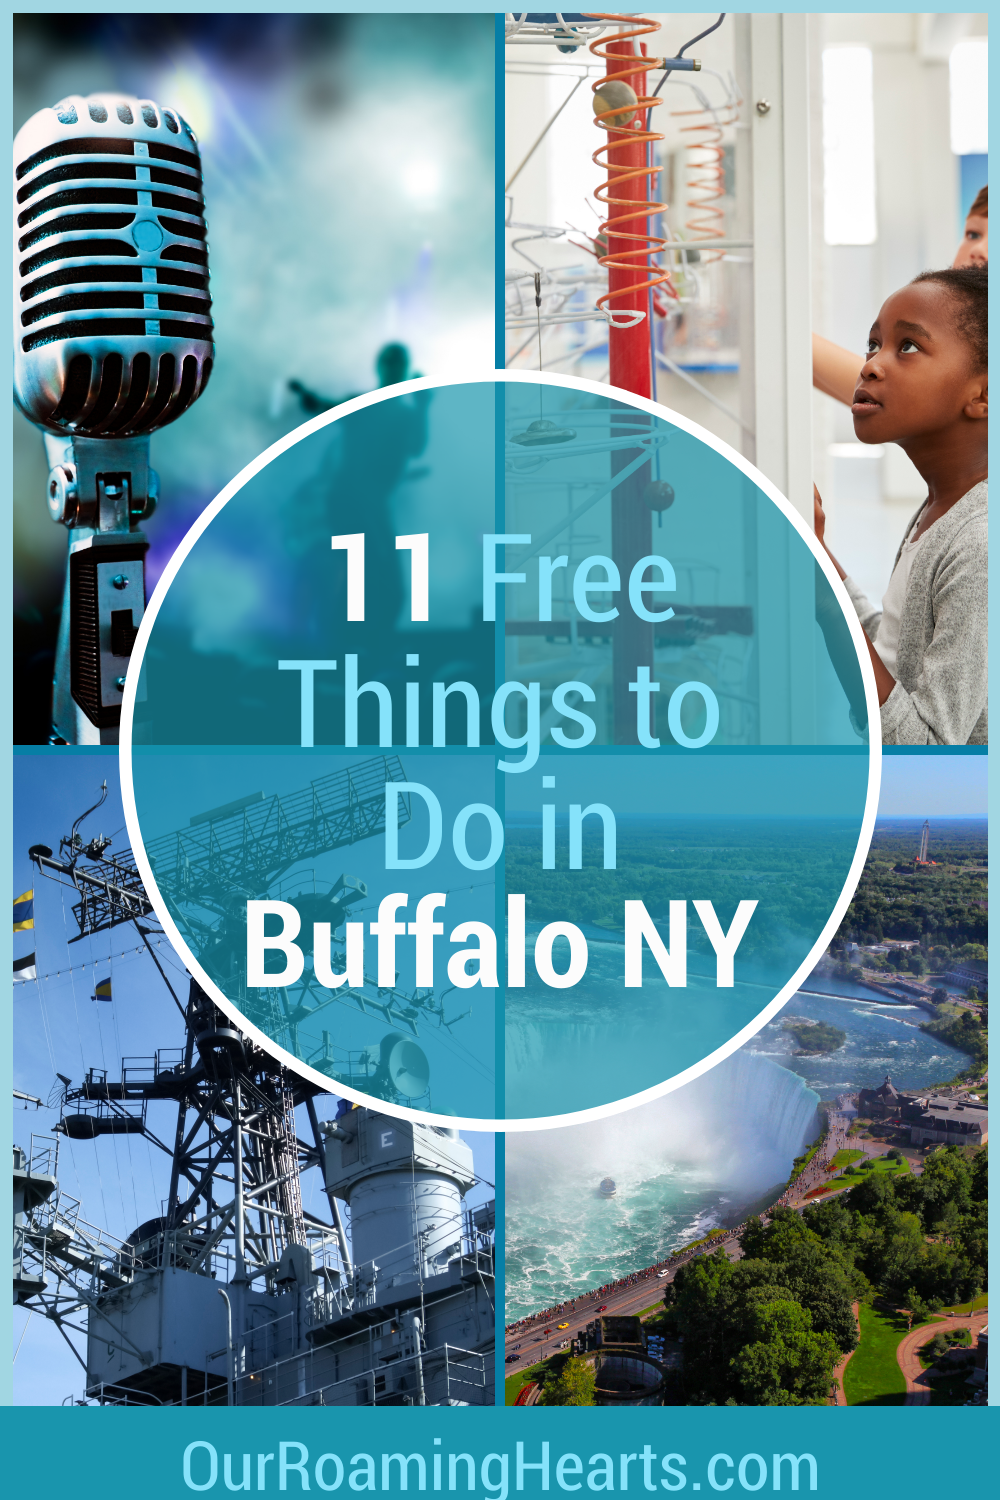 Grab your family and enjoy a day or two in Buffalo without breaking the bank! Here are your top 10 Free things to do in Buffalo. #ourroaminghearts #buffalo #newyork #frugaltravel #freefamilyattractions | Buffalo New York | Travel Buffalo | New York Travel | Free Family Attractions | Things to do in Buffalo | Free Things to do in Buffalo New York with Kids